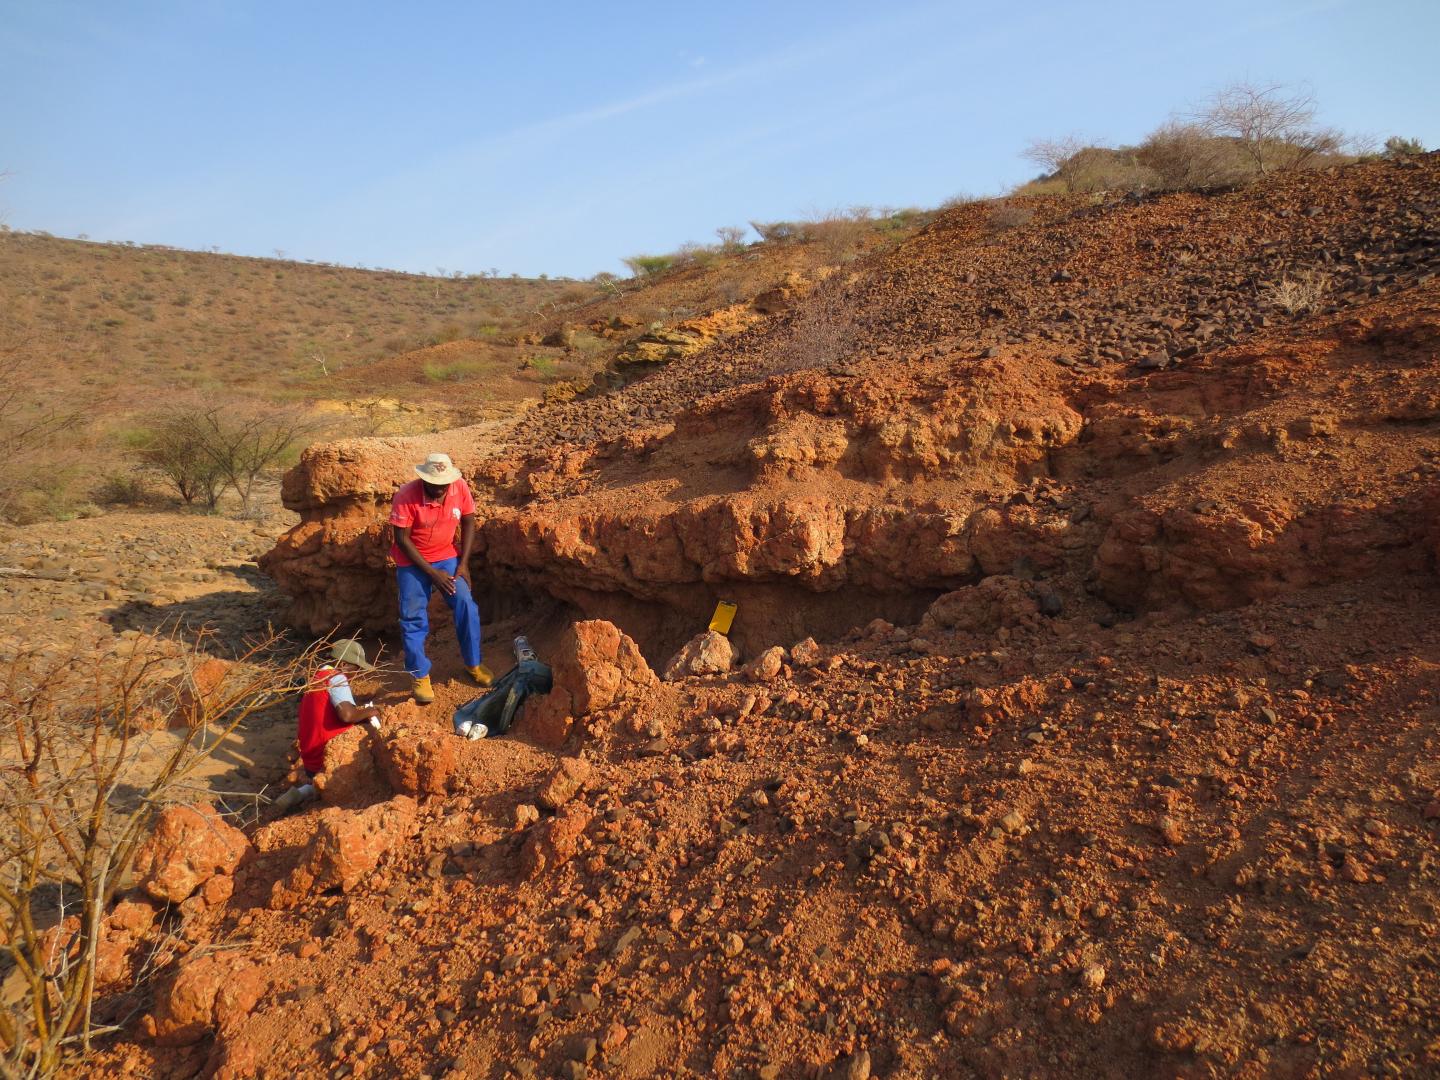 Scientists Collecting Rock Samples for Dating the Sediments at Nakwai, Kenya